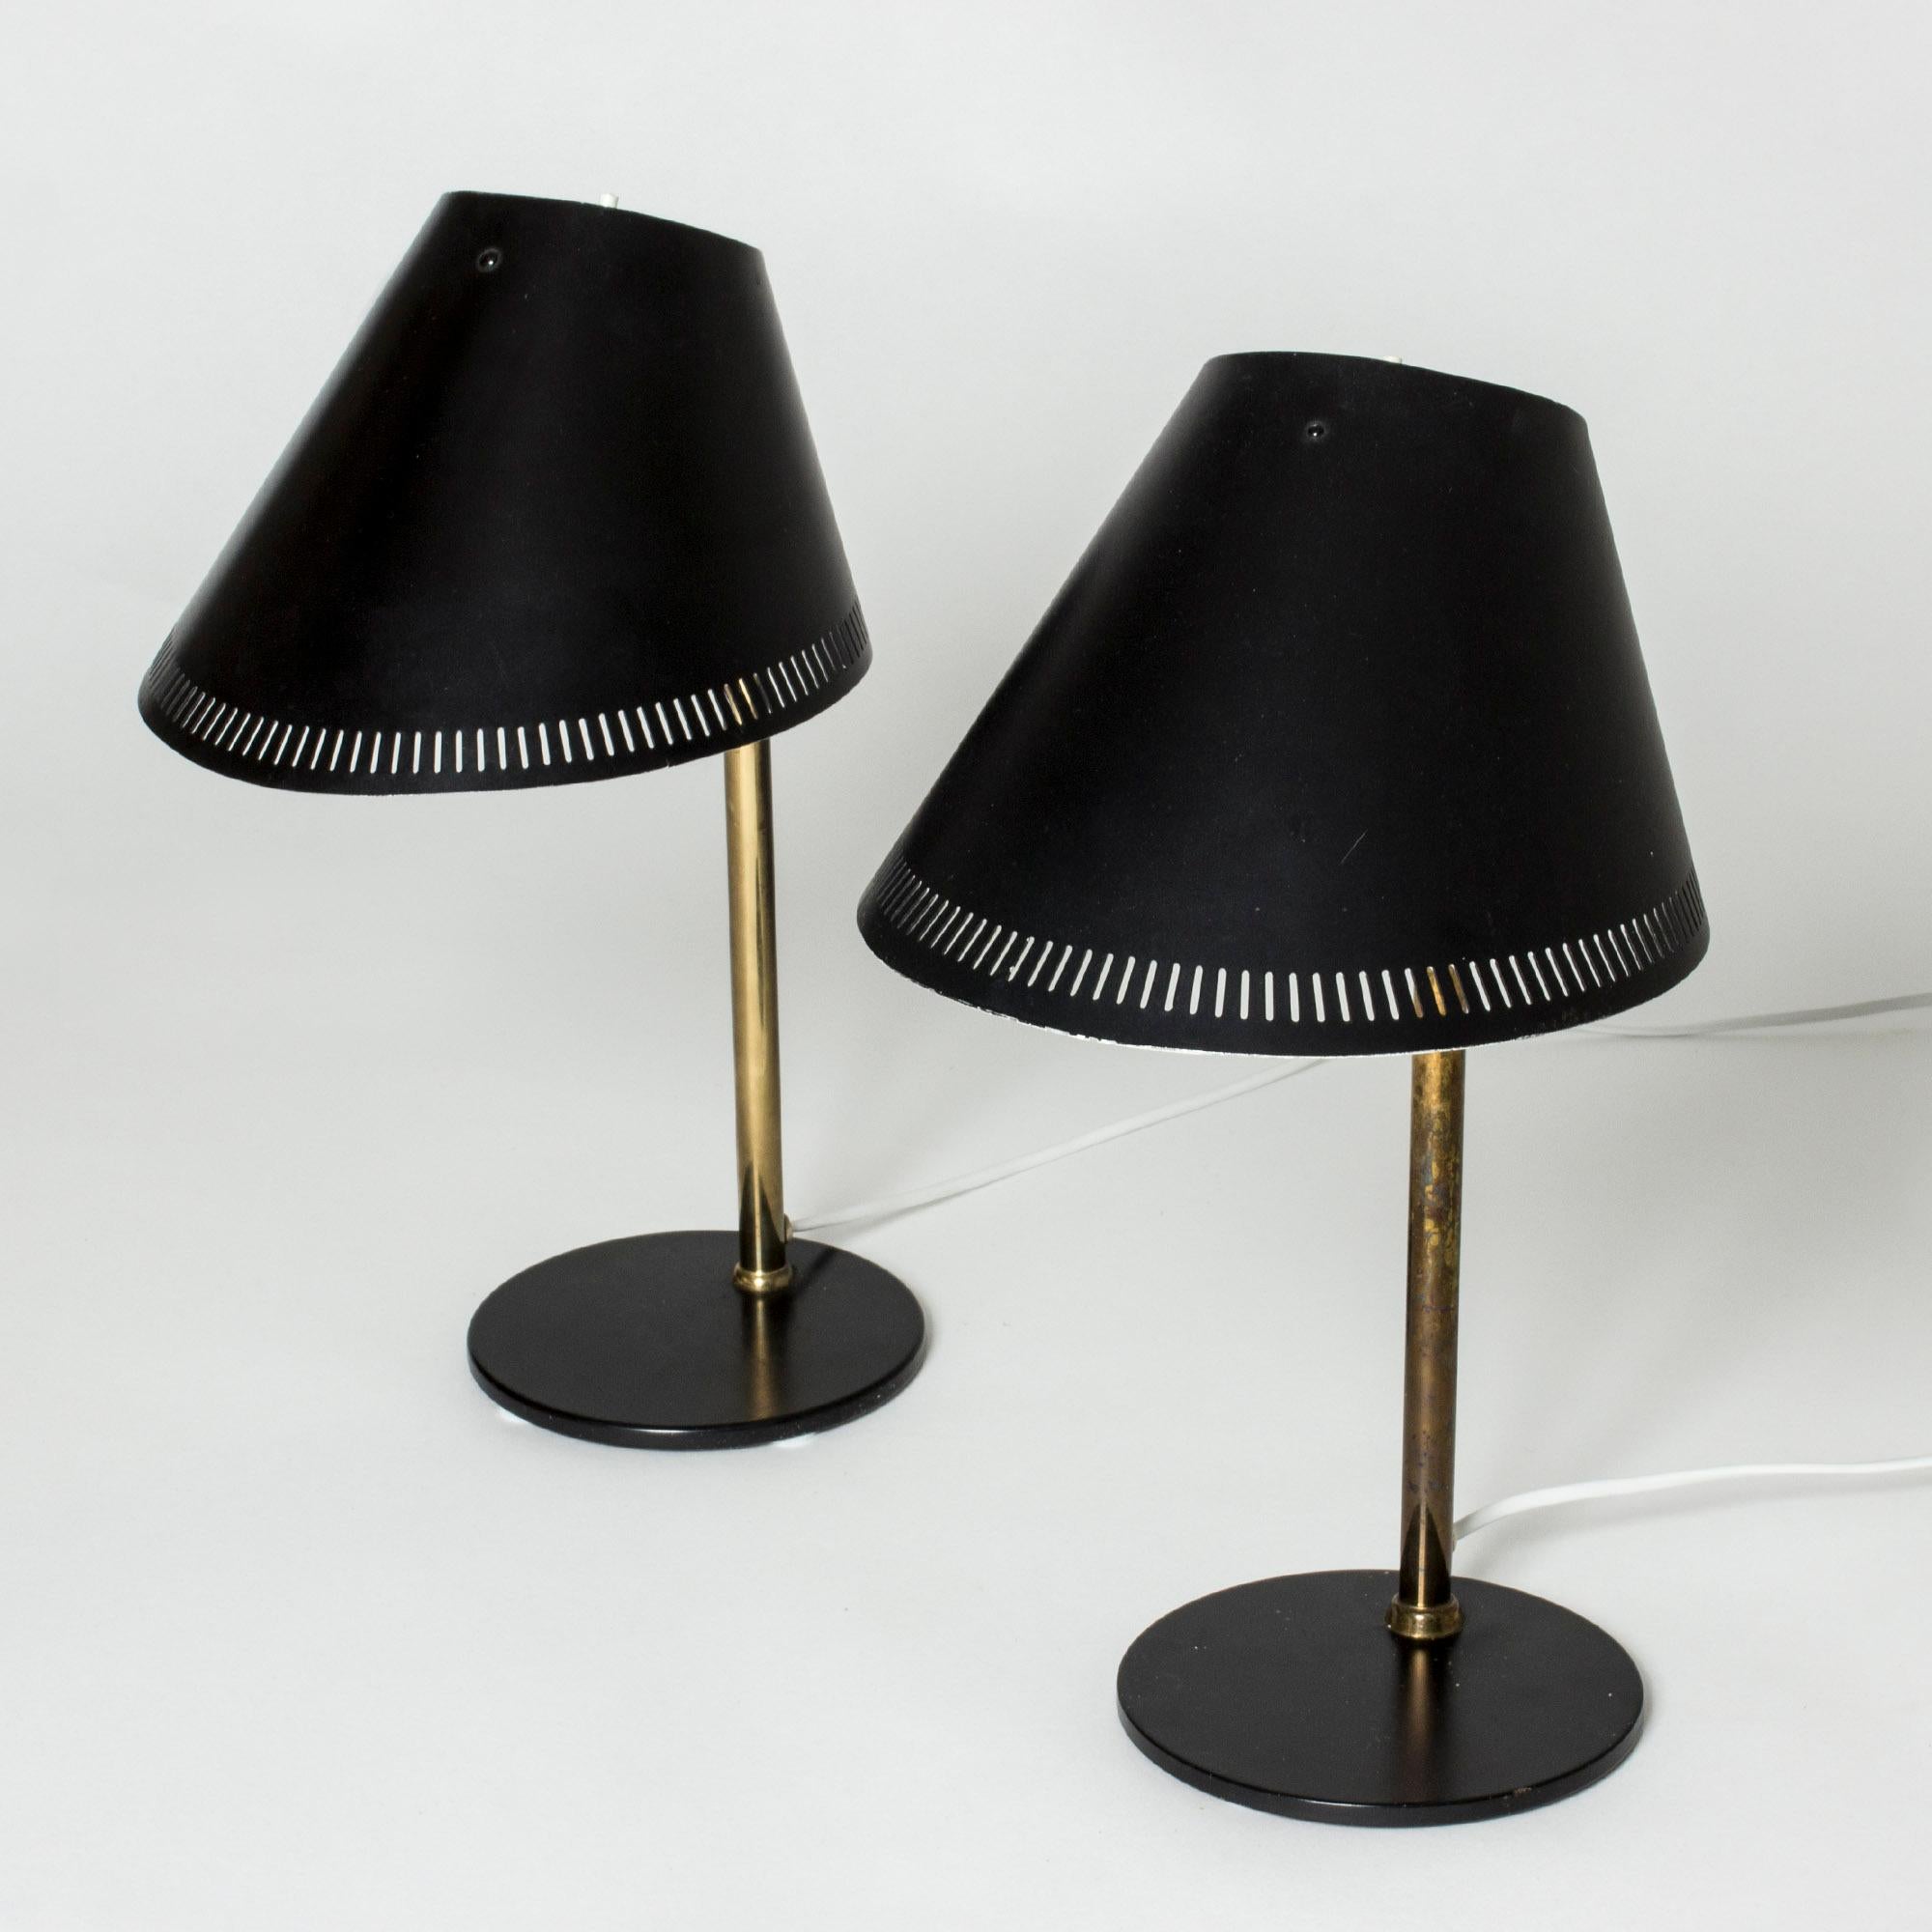 Scandinavian Modern Vintage Table Lamps Model 9227 by Paavo Tynell, Idman, Finland, 1950s For Sale